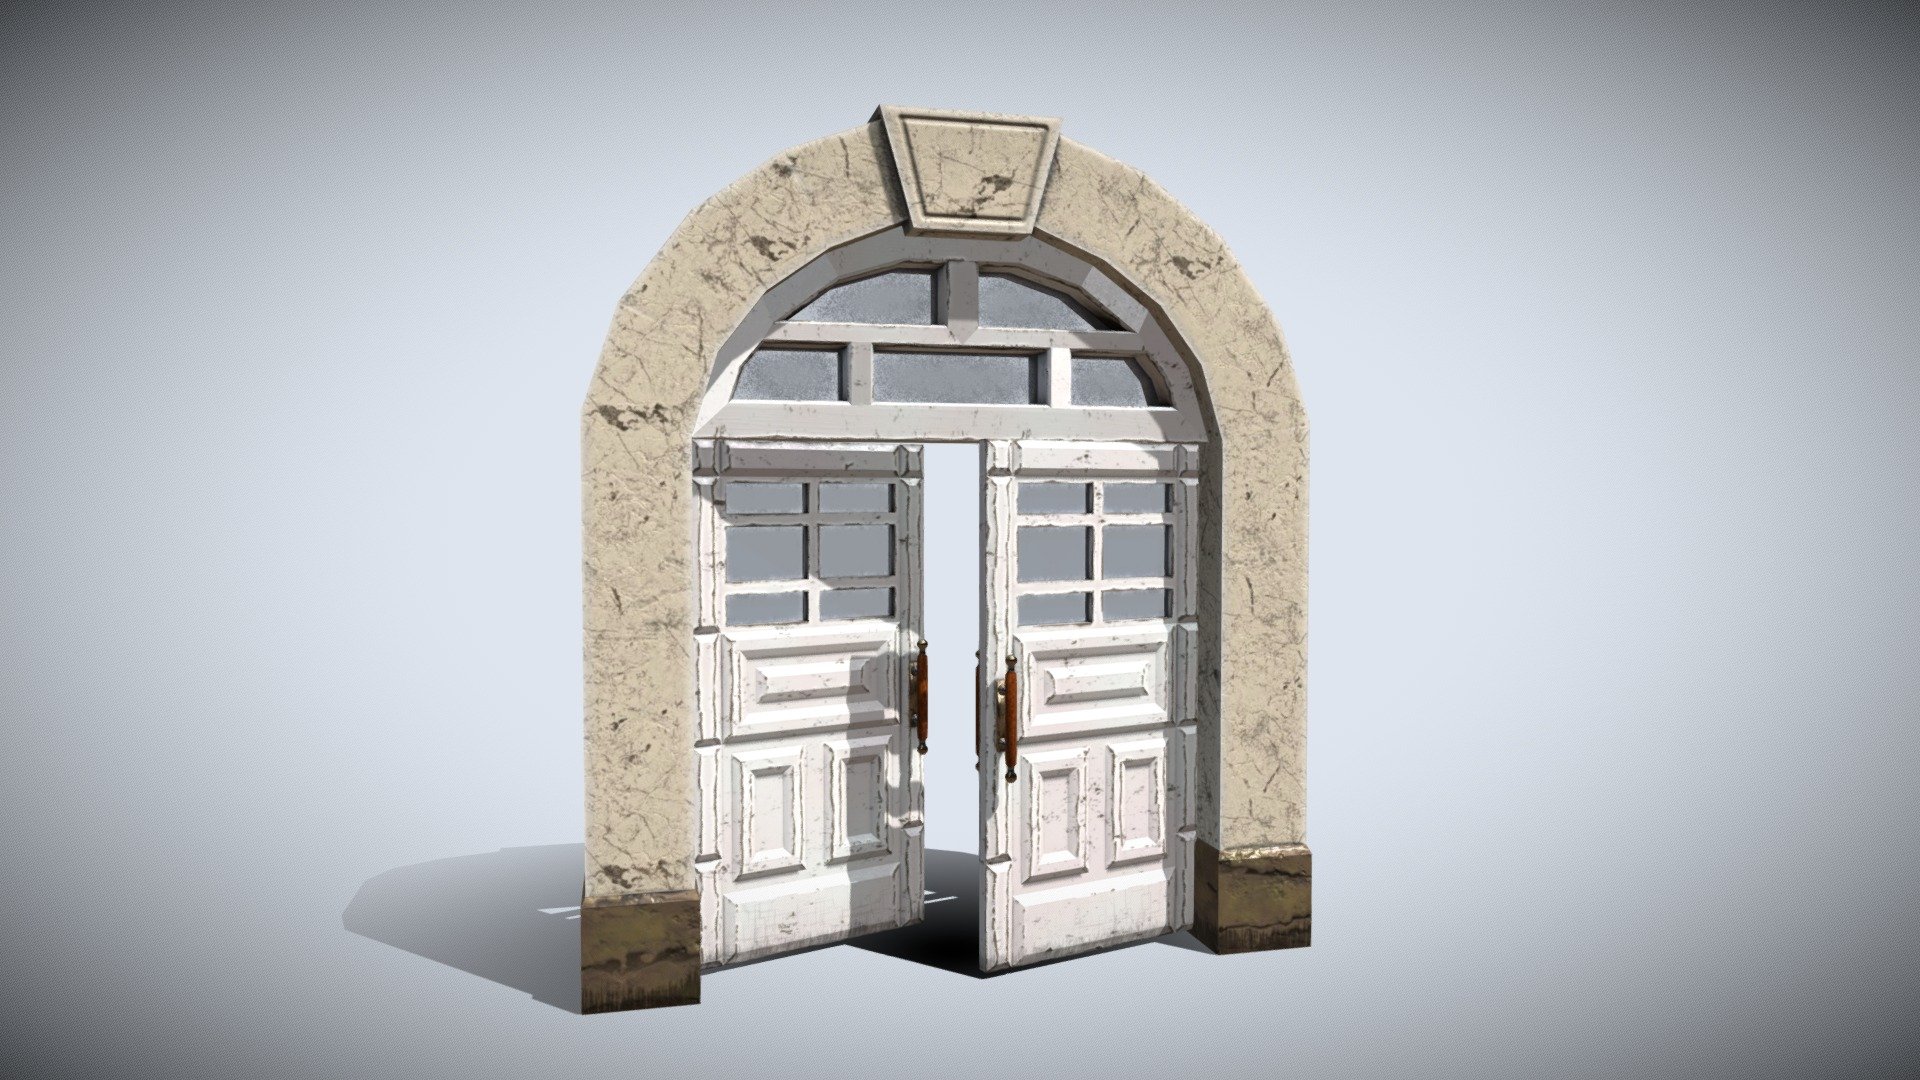 Old train station door, made up of 3 models. Door frame, glass arch and door. Realistic models with few polygons, good for use in games. The 3d models come separately so you can assemble them to your liking. In additional download there are more formats, .dae .fbx .obj 3d model